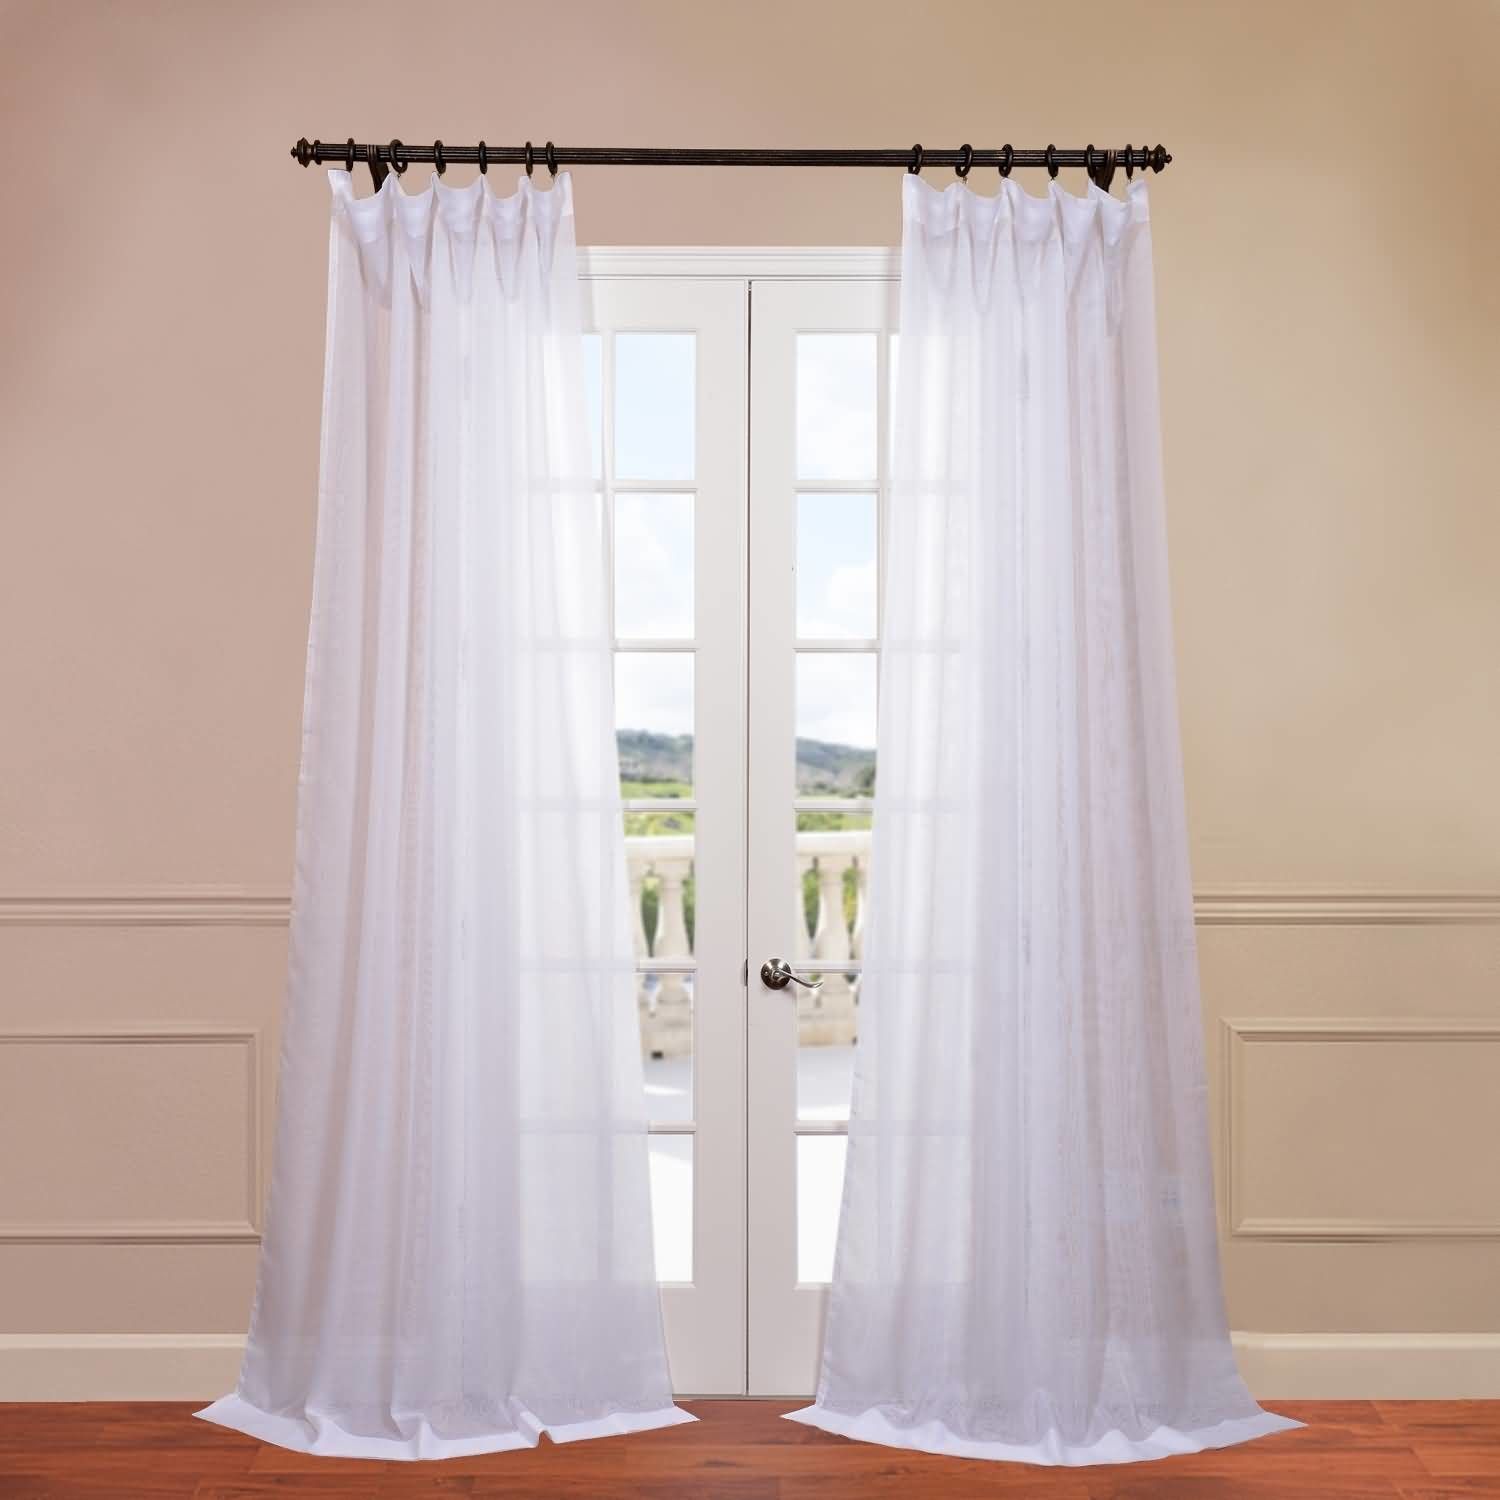 Signature Double Layered Sheer Single Curtain Panel Intended For Double Layer Sheer White Single Curtain Panels (View 5 of 20)